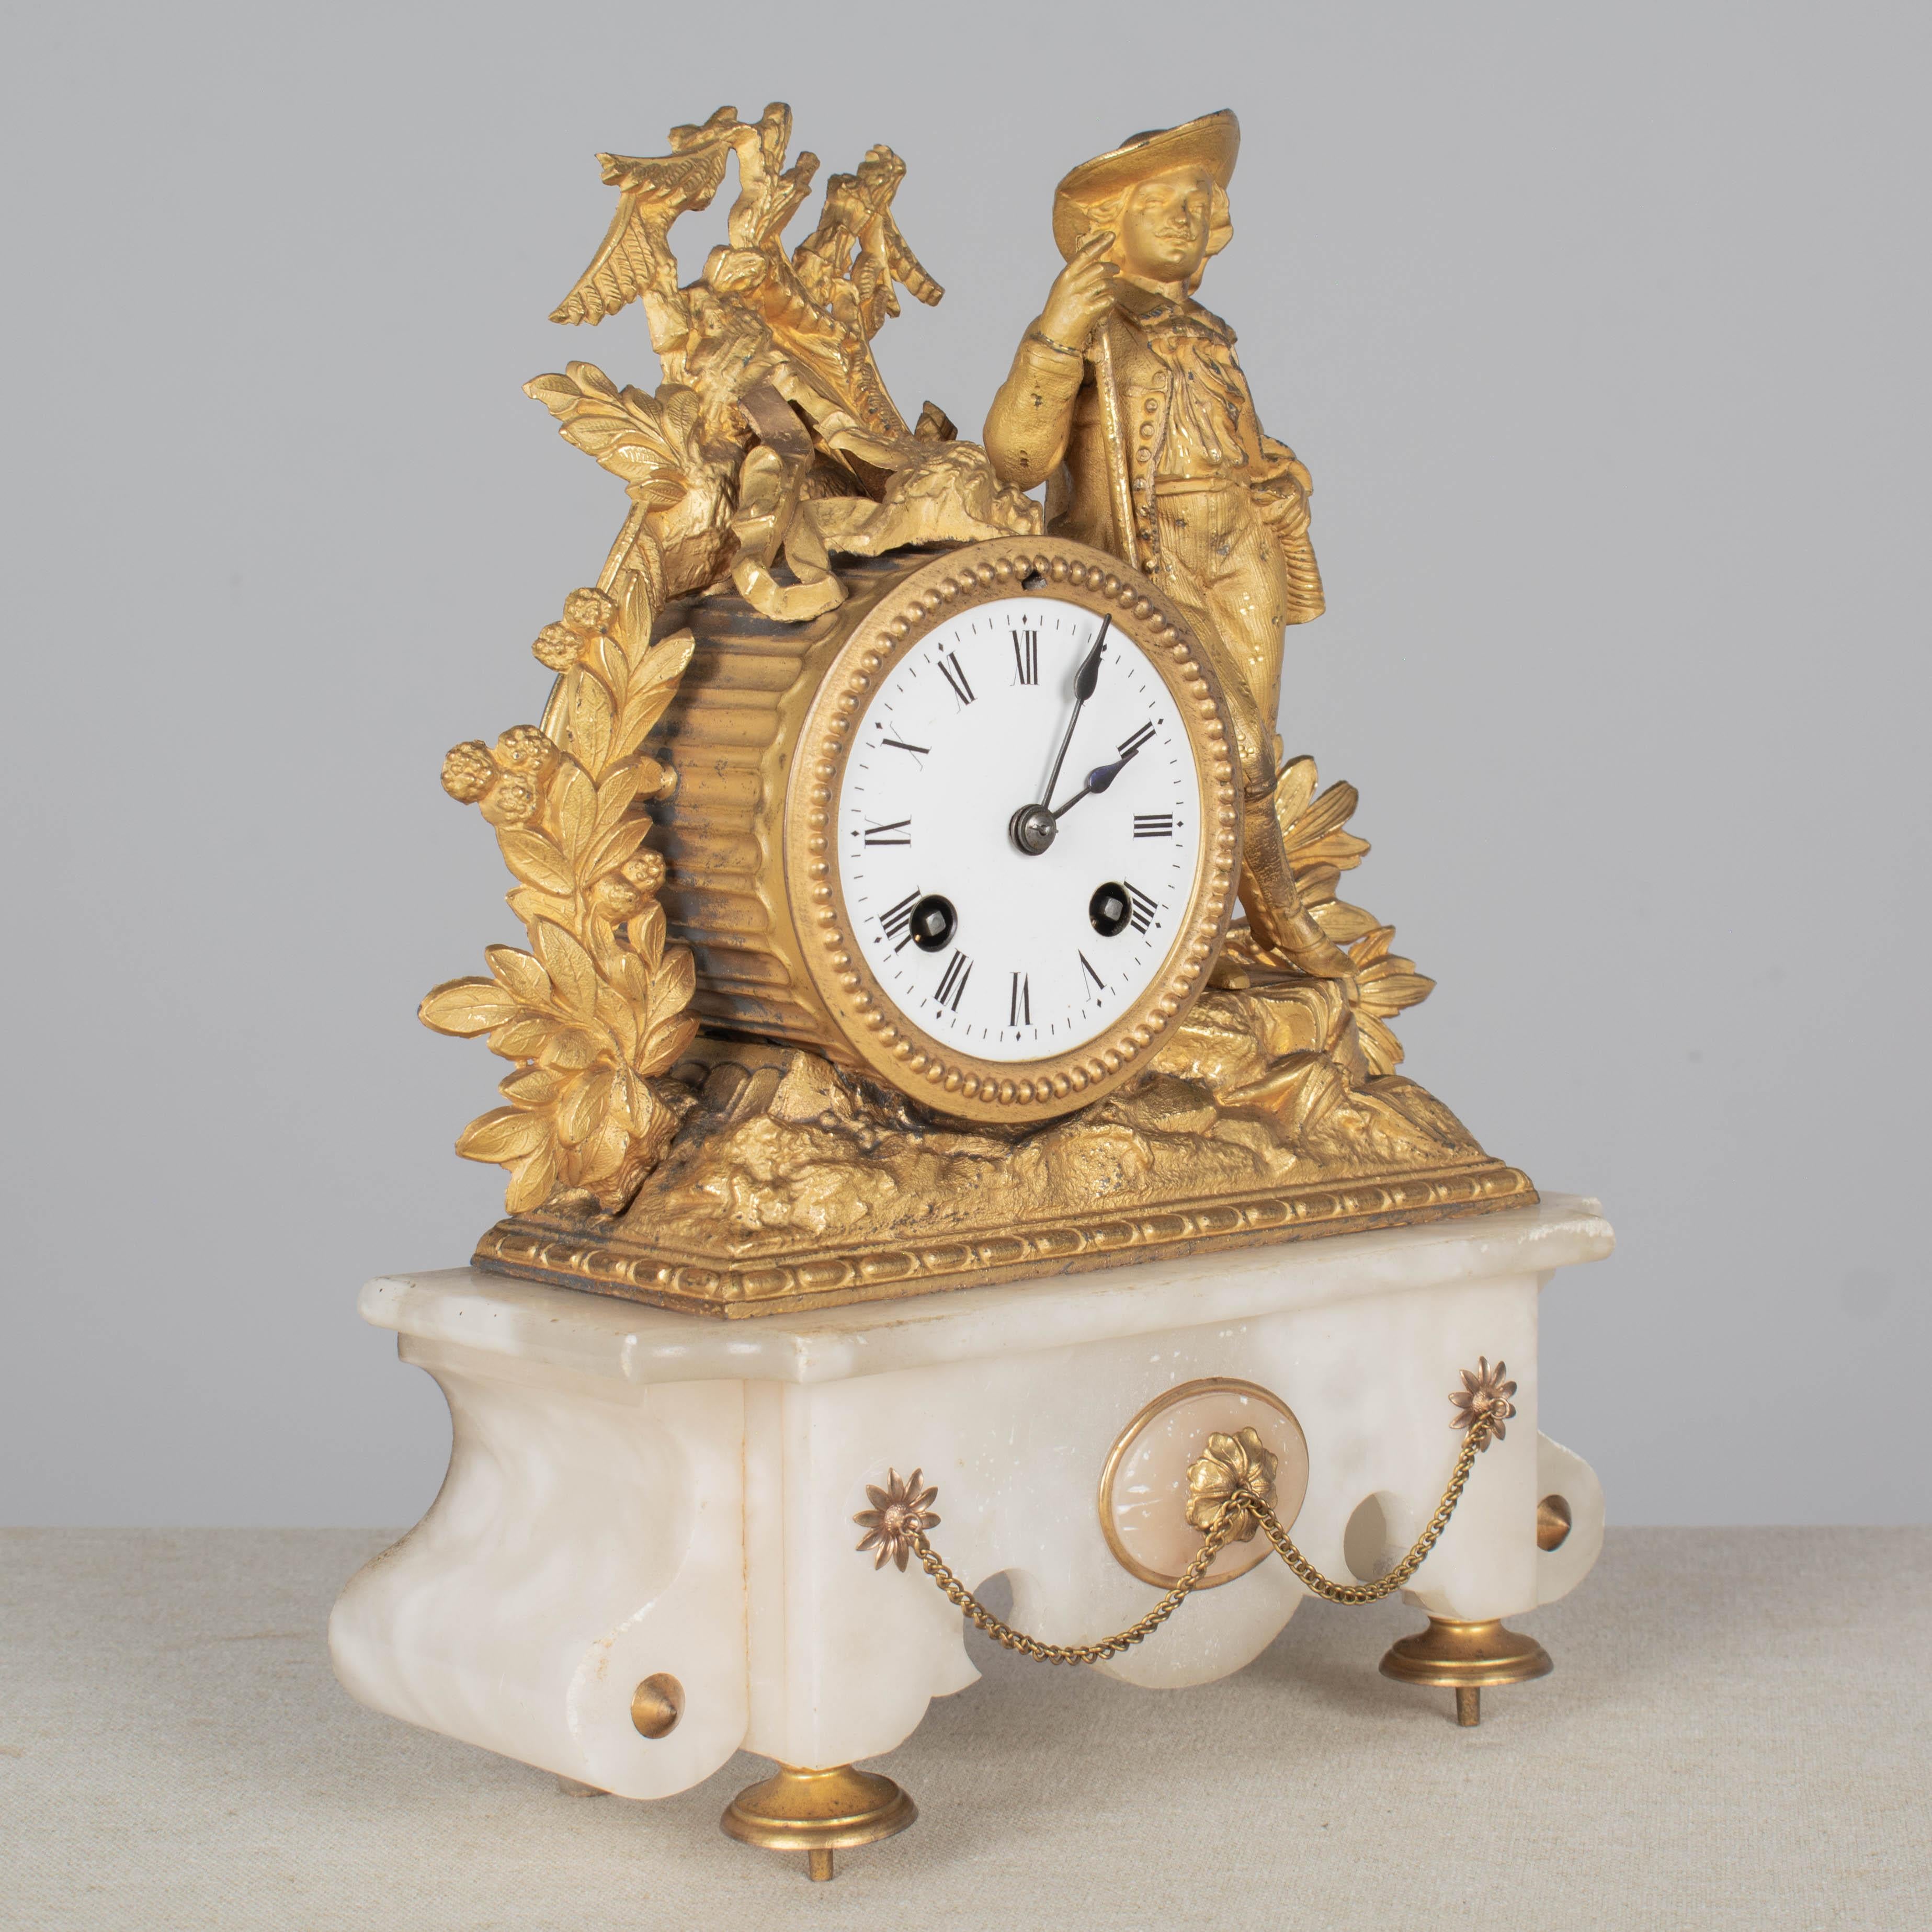 Cast 19th Century French Gilt Bronze Mantel Clock by Philippe Mourey